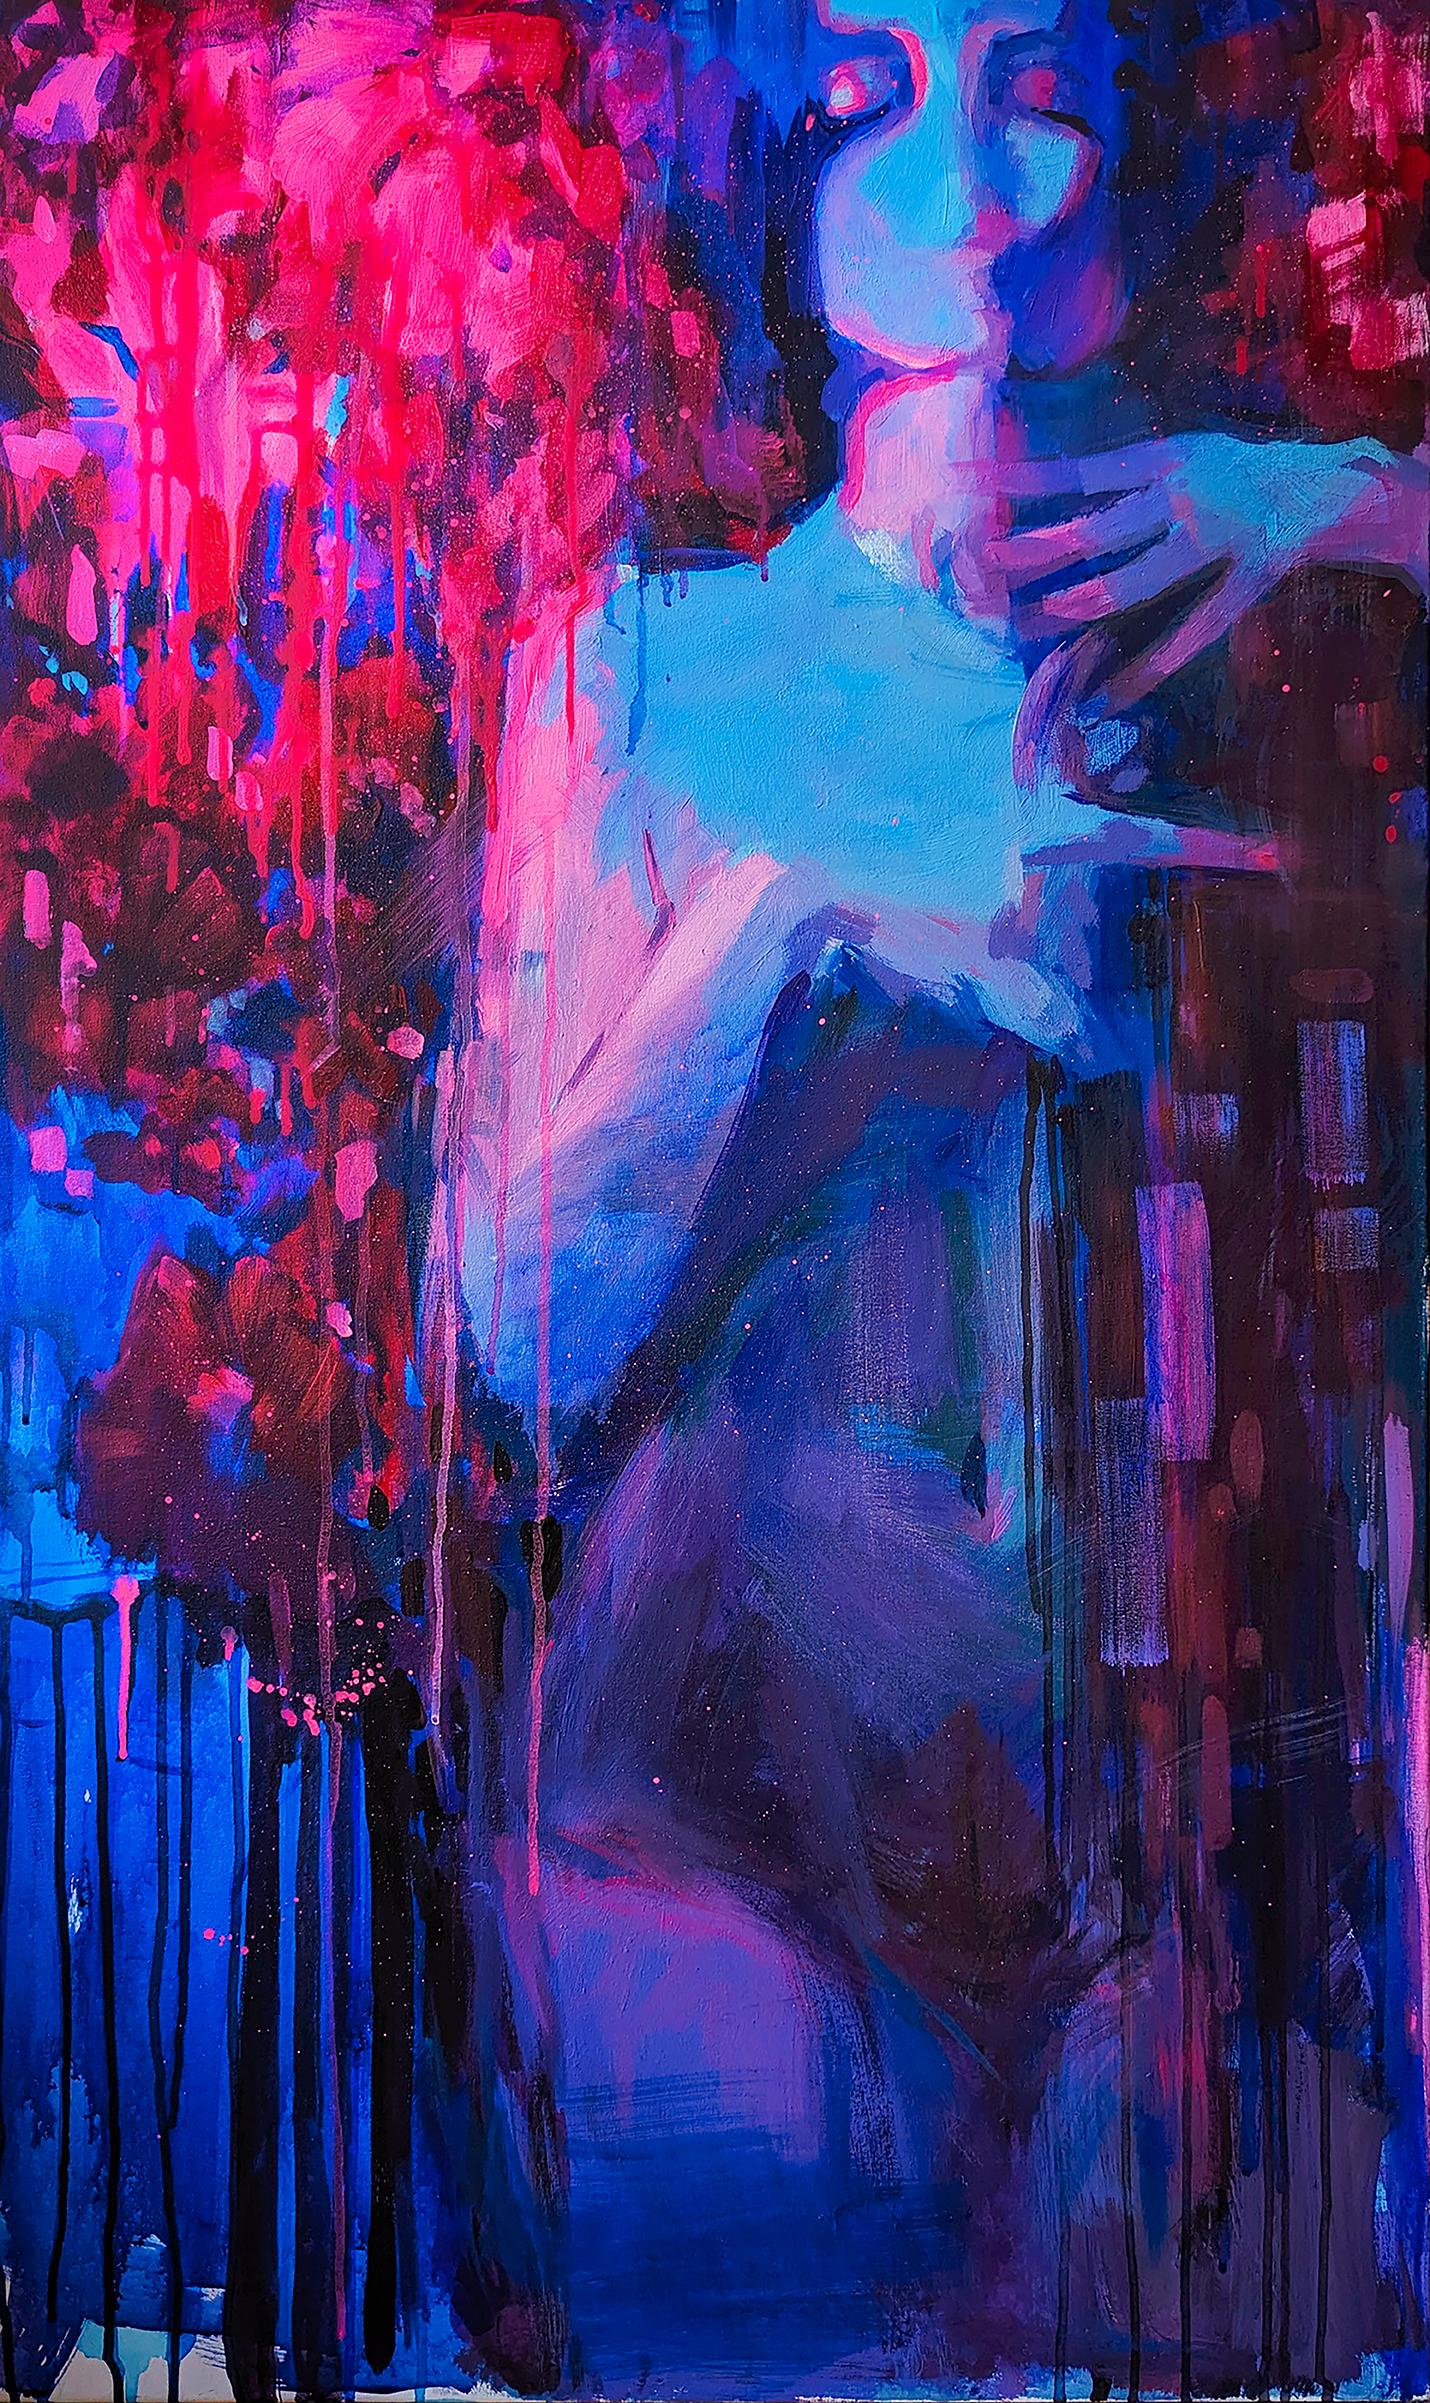 ITEM DETAILS

The edges are painted
Some parts of the picture glow under blue light
The painting was part of an exhibition 'Ancestral call' in Switzerland

ABOUT THE ARTWORK

 On this canvas is the portrait of a woman deeply immersed in her
inner